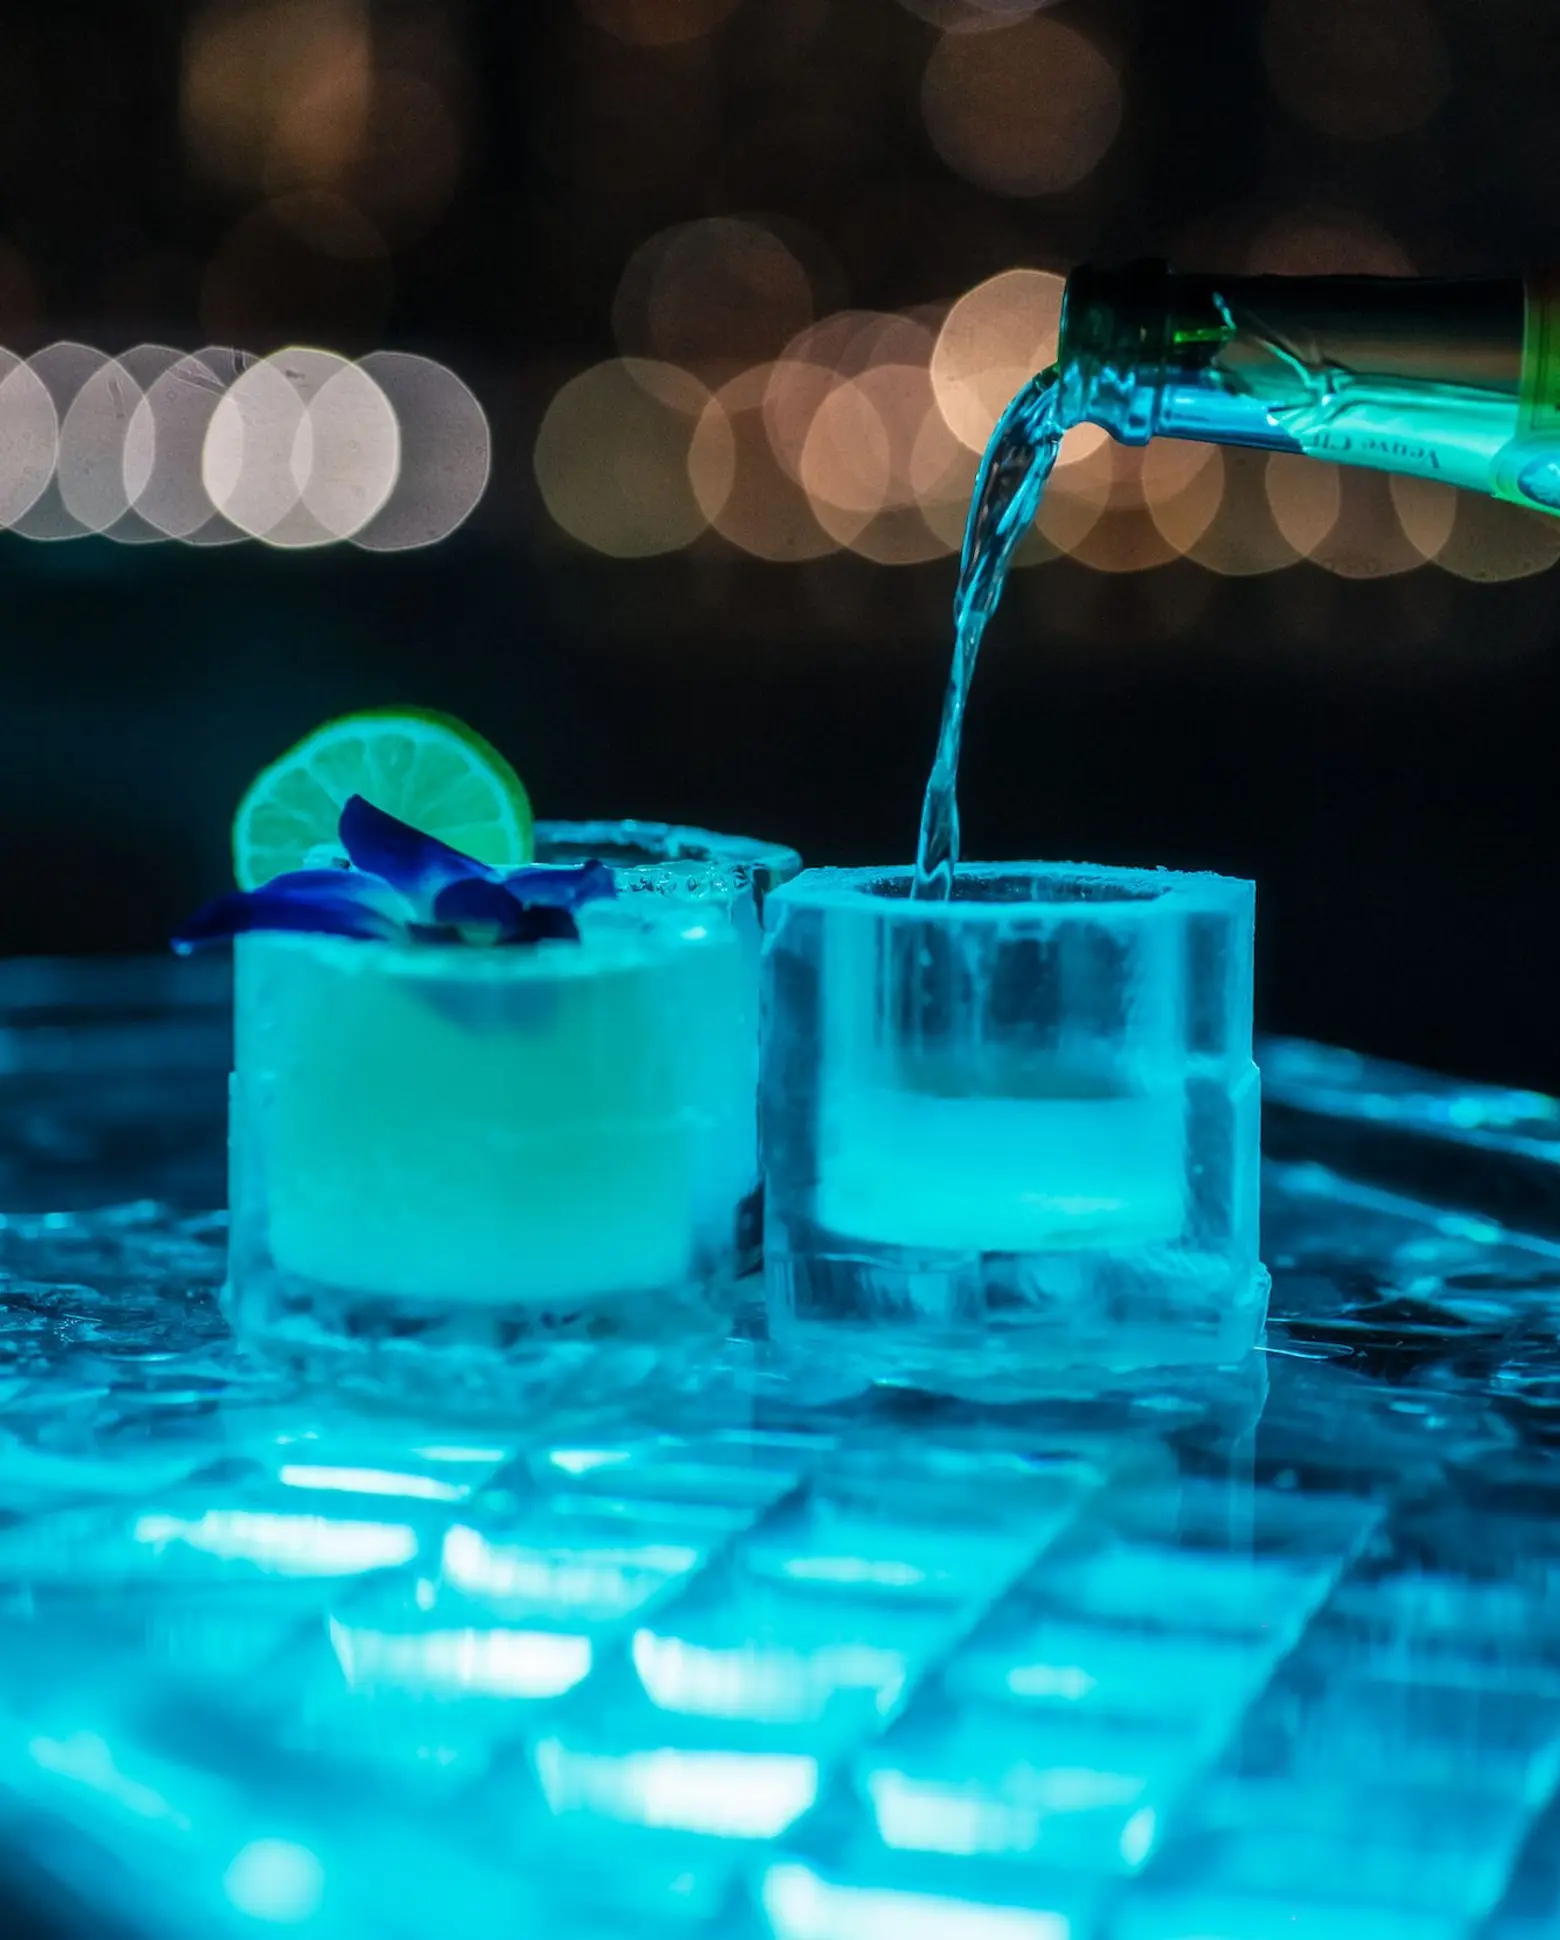 Stamped Ice Trend Heats Up At Cocktail Bars